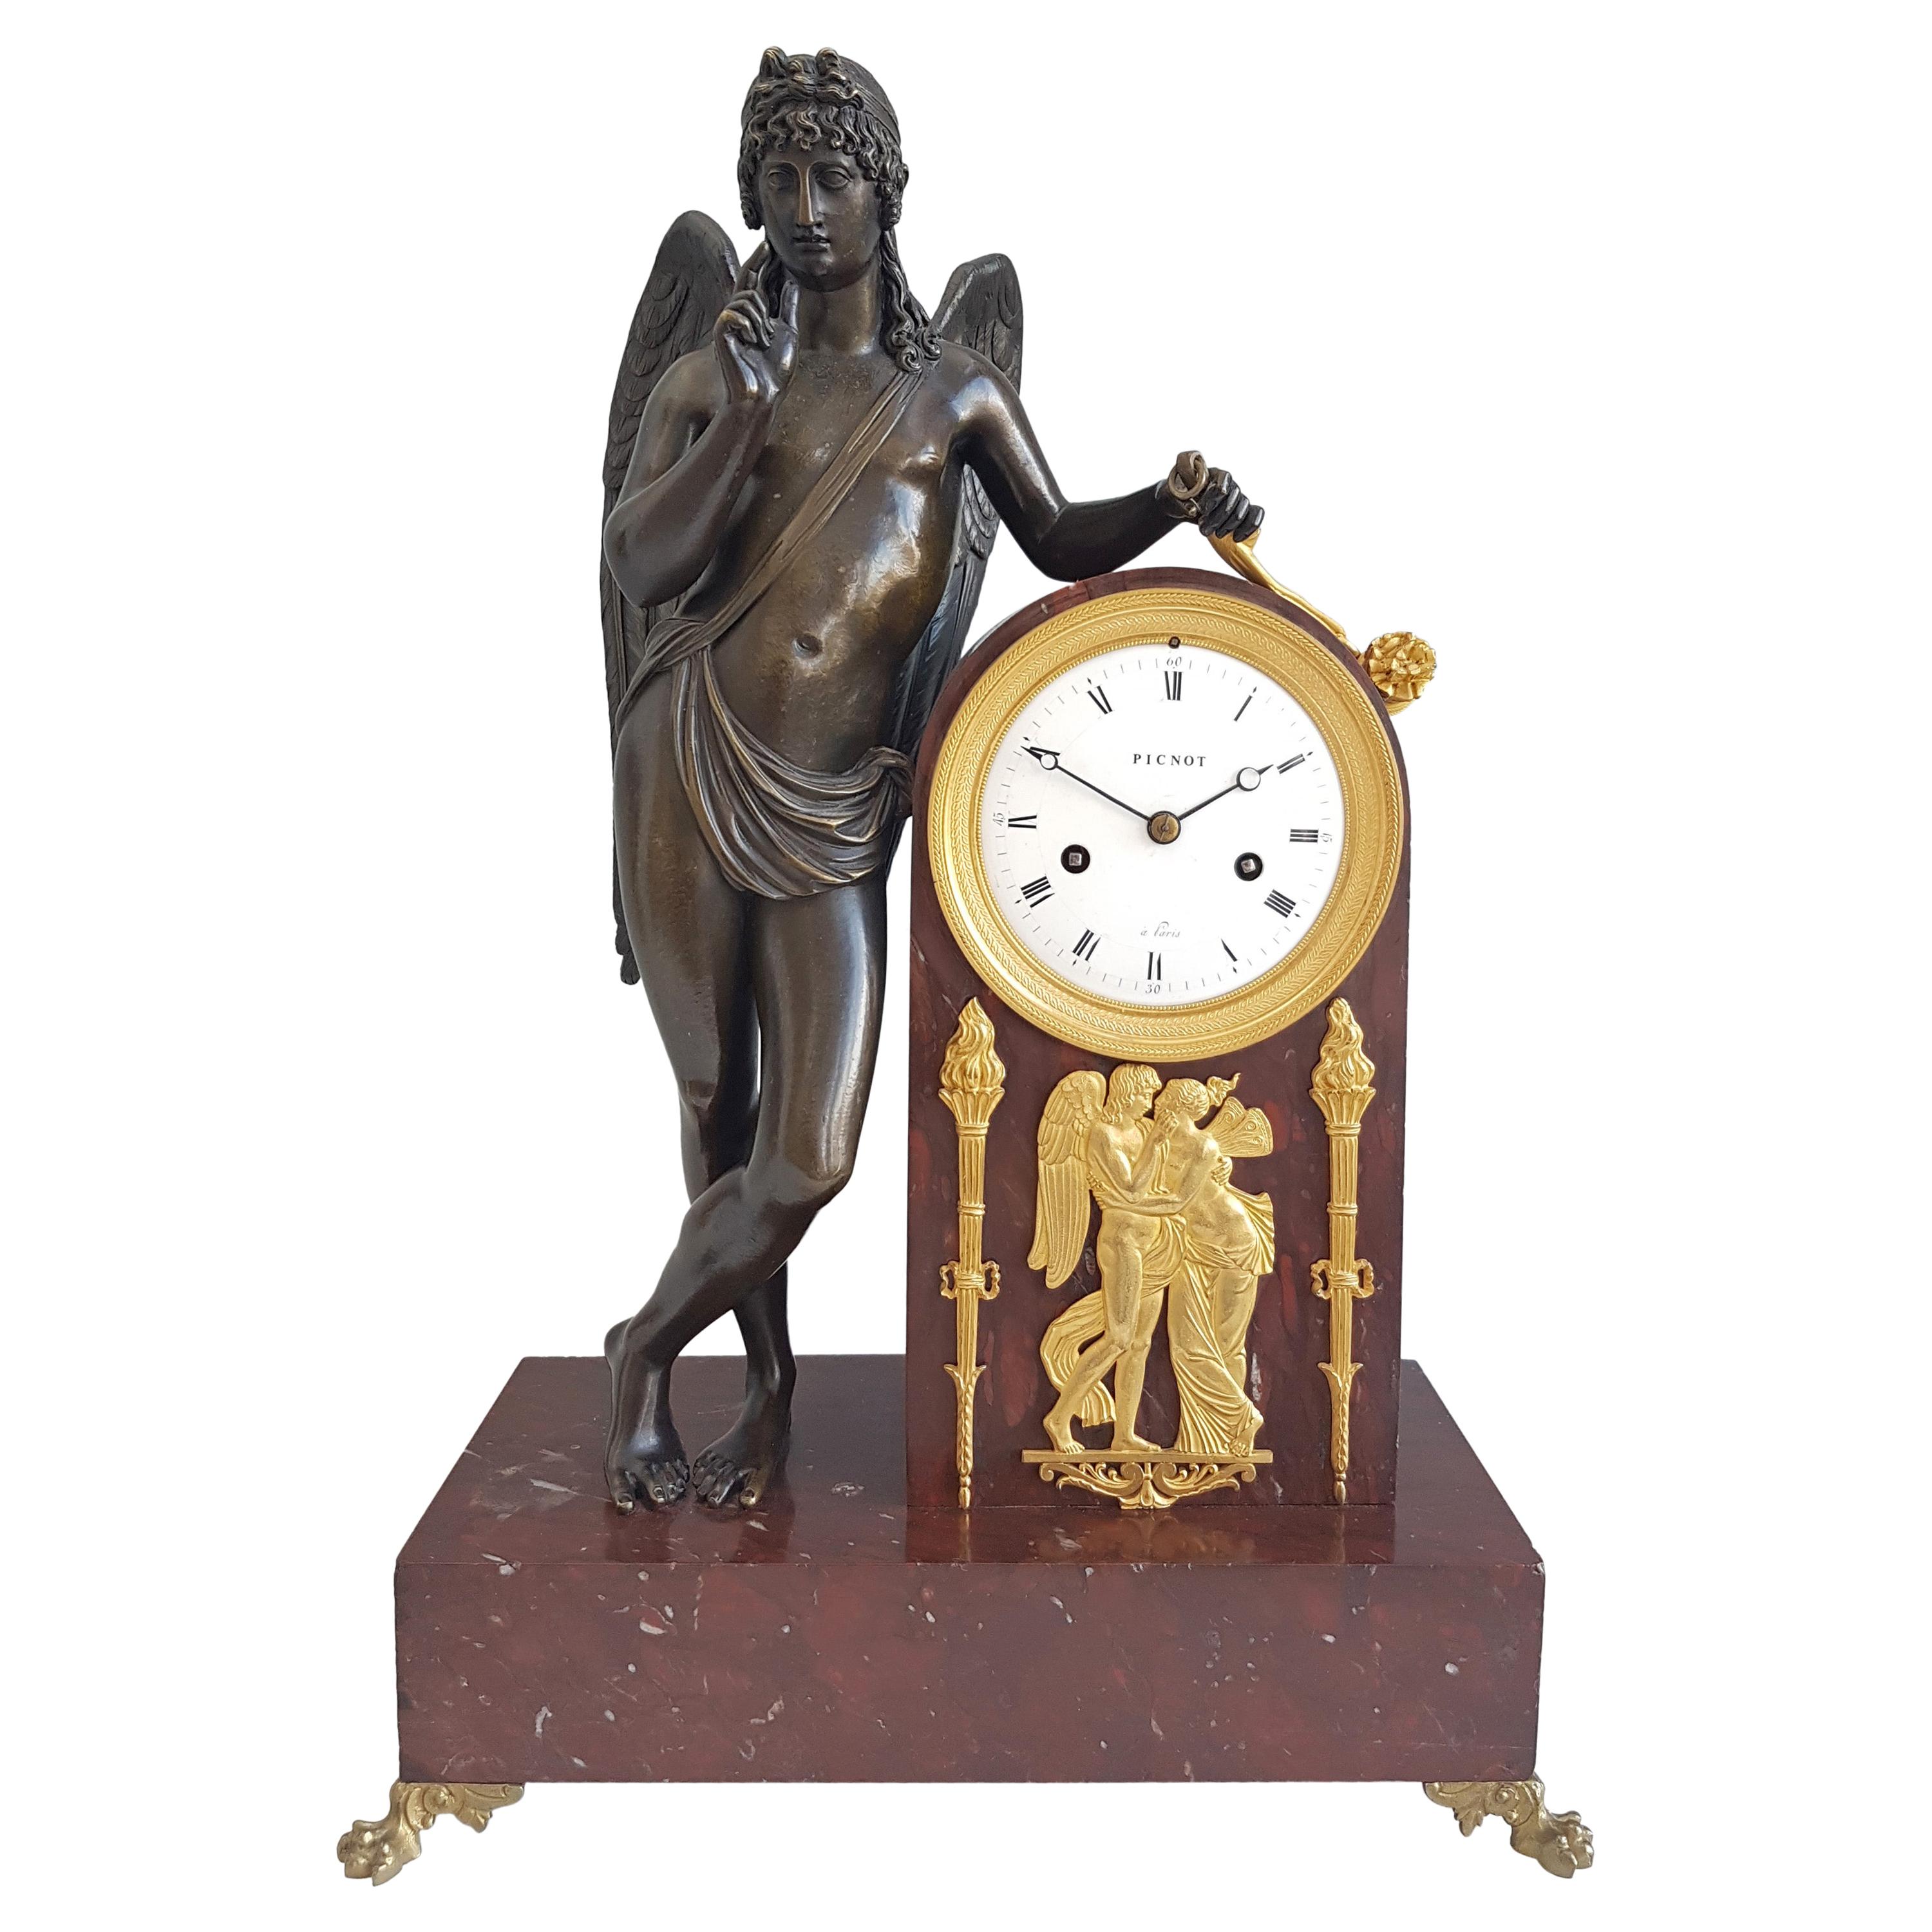 French Empire Mantel Clock in Ormolu, Patinated Bronze and Marble, Signed Picnot